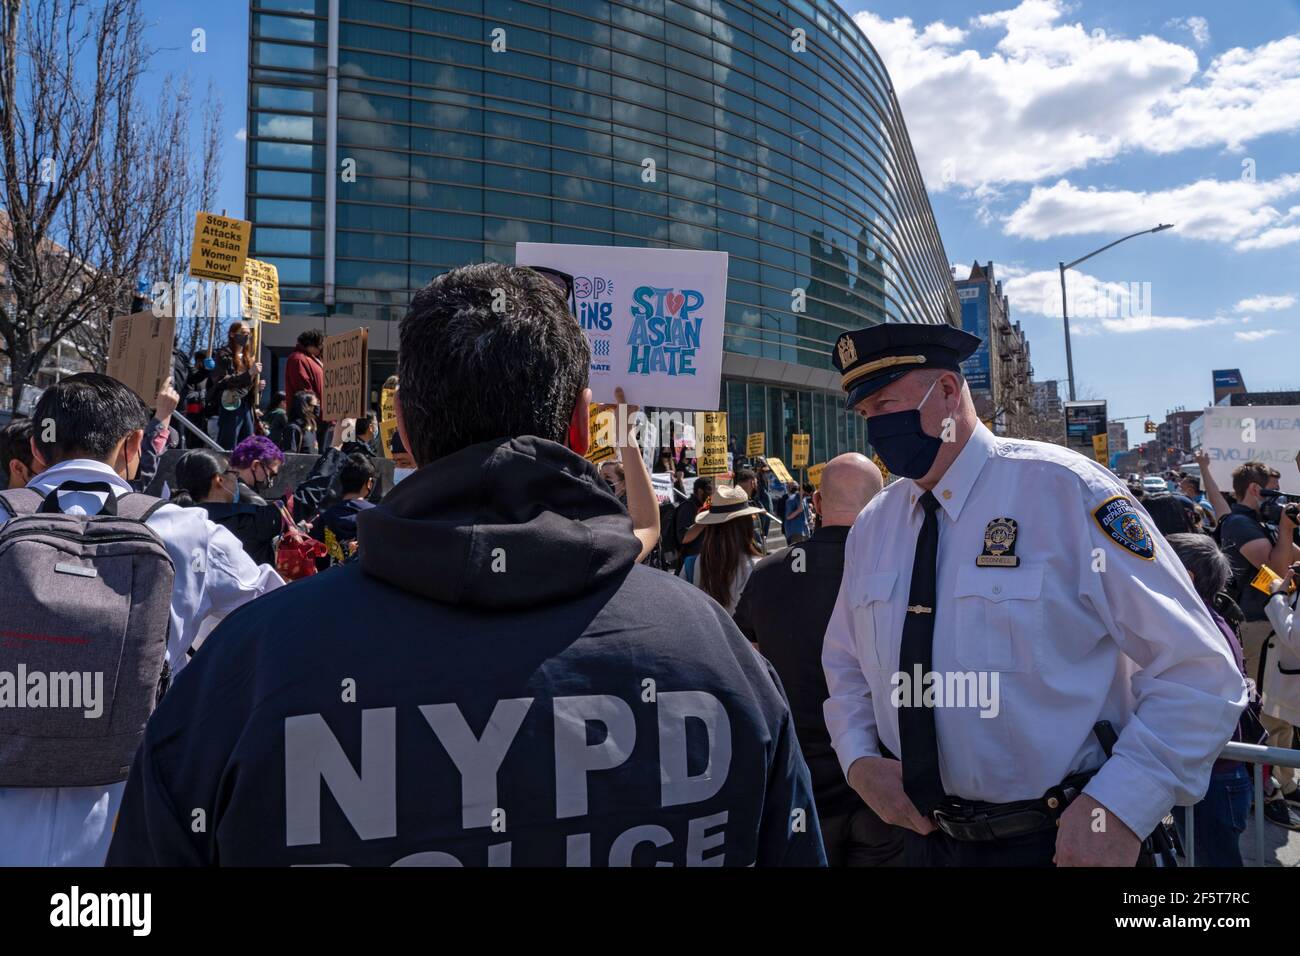 NEW YORK, NY - MARCH 27: New York Police Department (NYPD) Officers seen at a National Day of Action rally at the Flushing neighborhood on March 27, 2021 in the Queens borough of New York City.  Rallies and a show of support for Asian Americans sprang up Saturday across country as members and supporters of the Asian-American community take part in a National Day of Action. Credit: Ron Adar/Alamy Live News Stock Photo